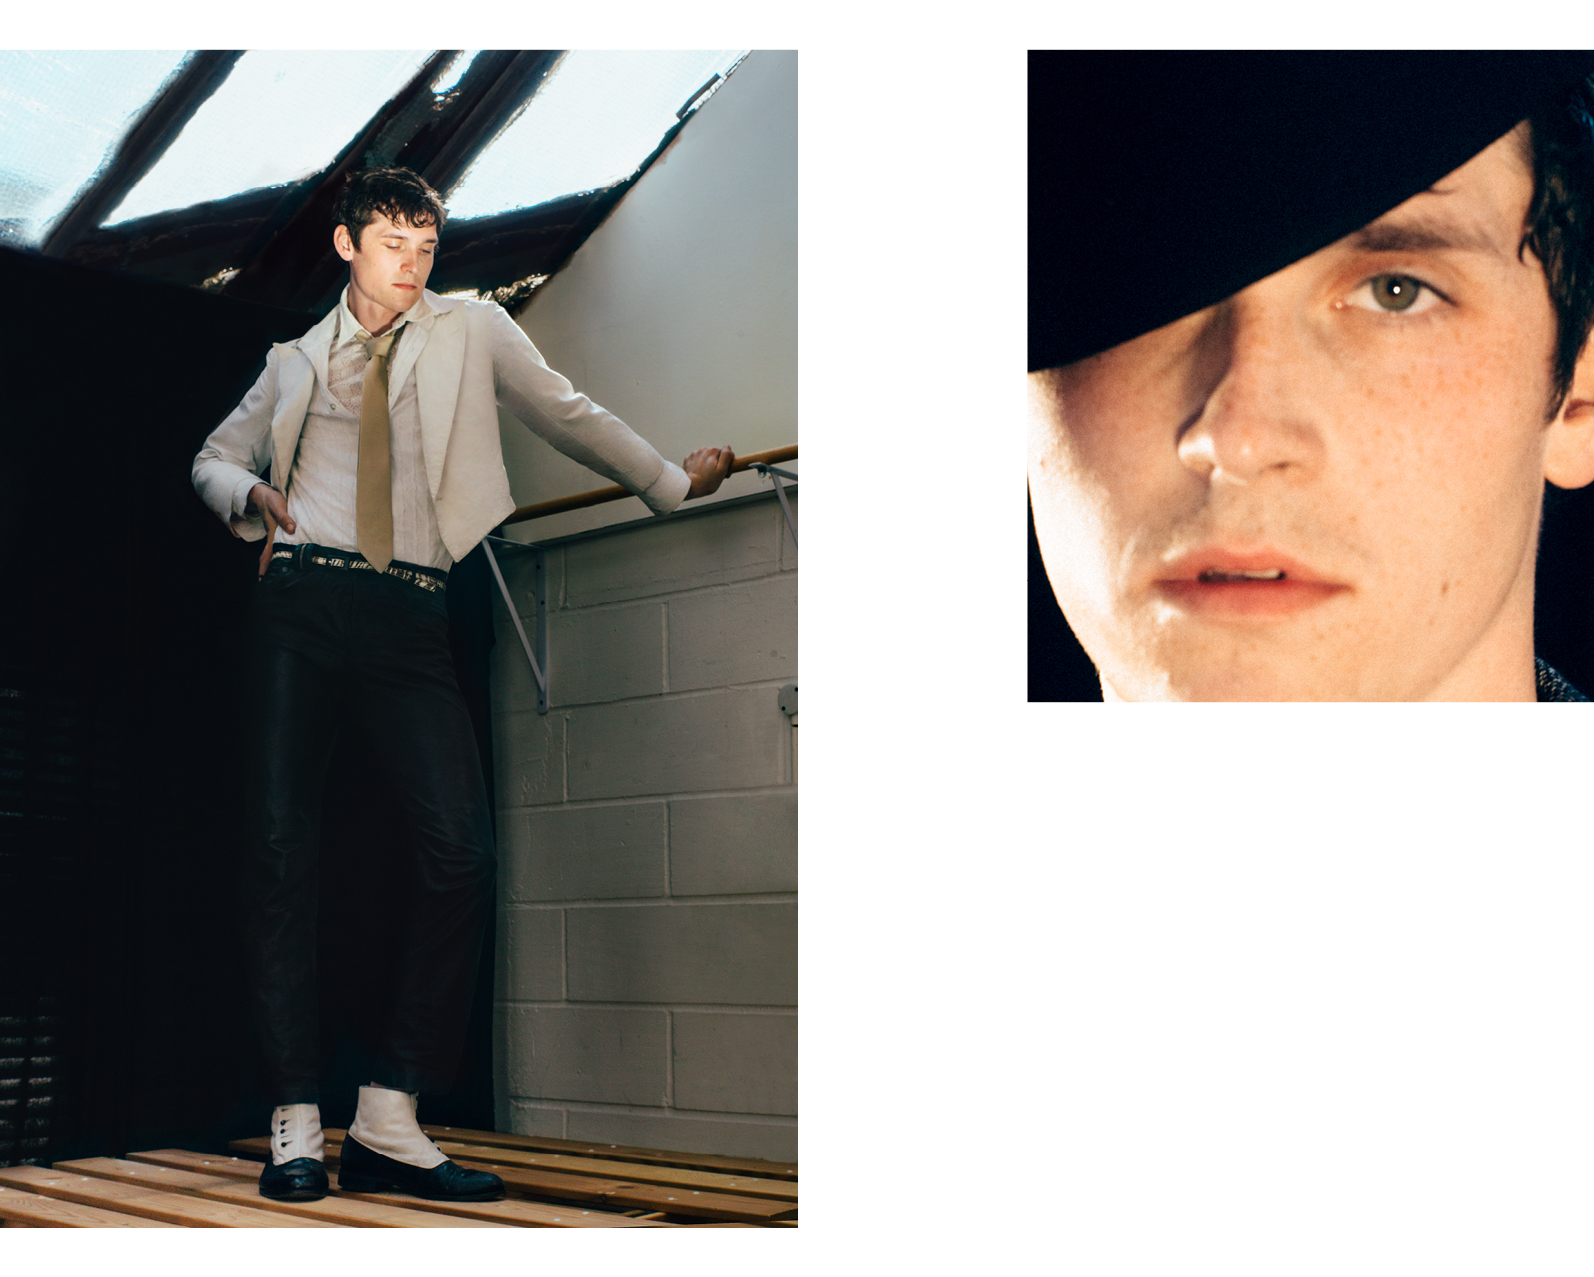 Left: Jacket, tie, and belt, stylist's own. Shirt by Pierre Cardin. Shirt, worn underneath, by Hugo Boss. Trousers by John Galliano. Shoes, worn throughout, from the Costume Studio, London.Right: Hat by Davide Cenci.